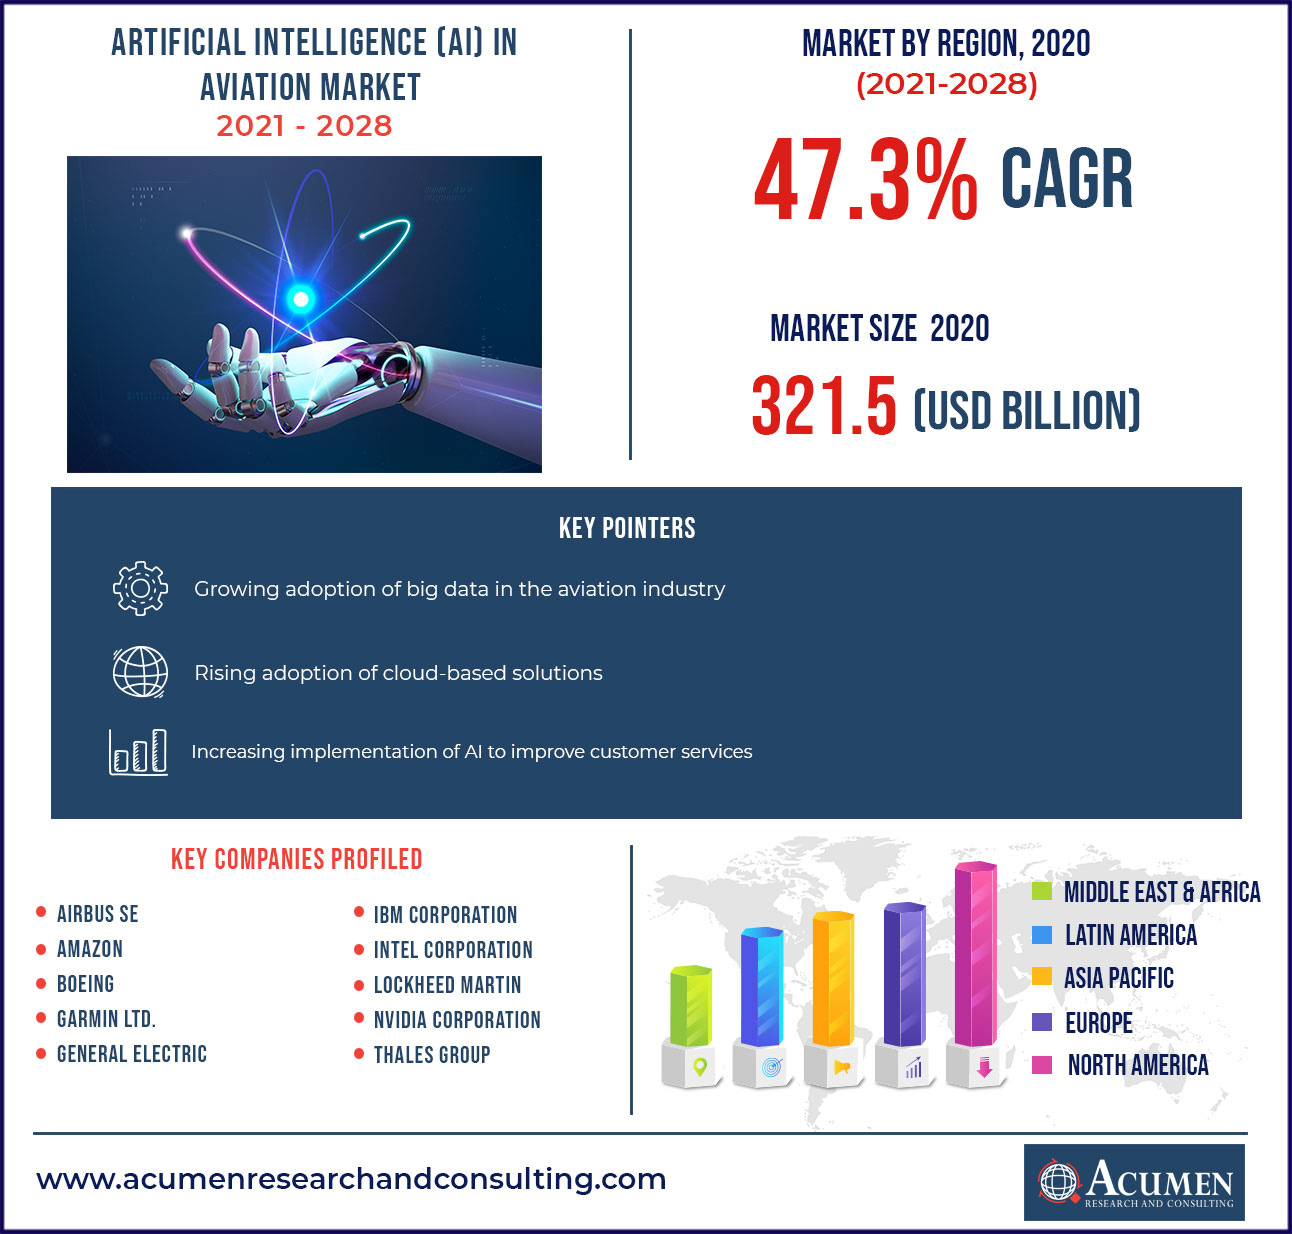 Artificial Intelligence (AI) in Aviation Market Size 2021-2028